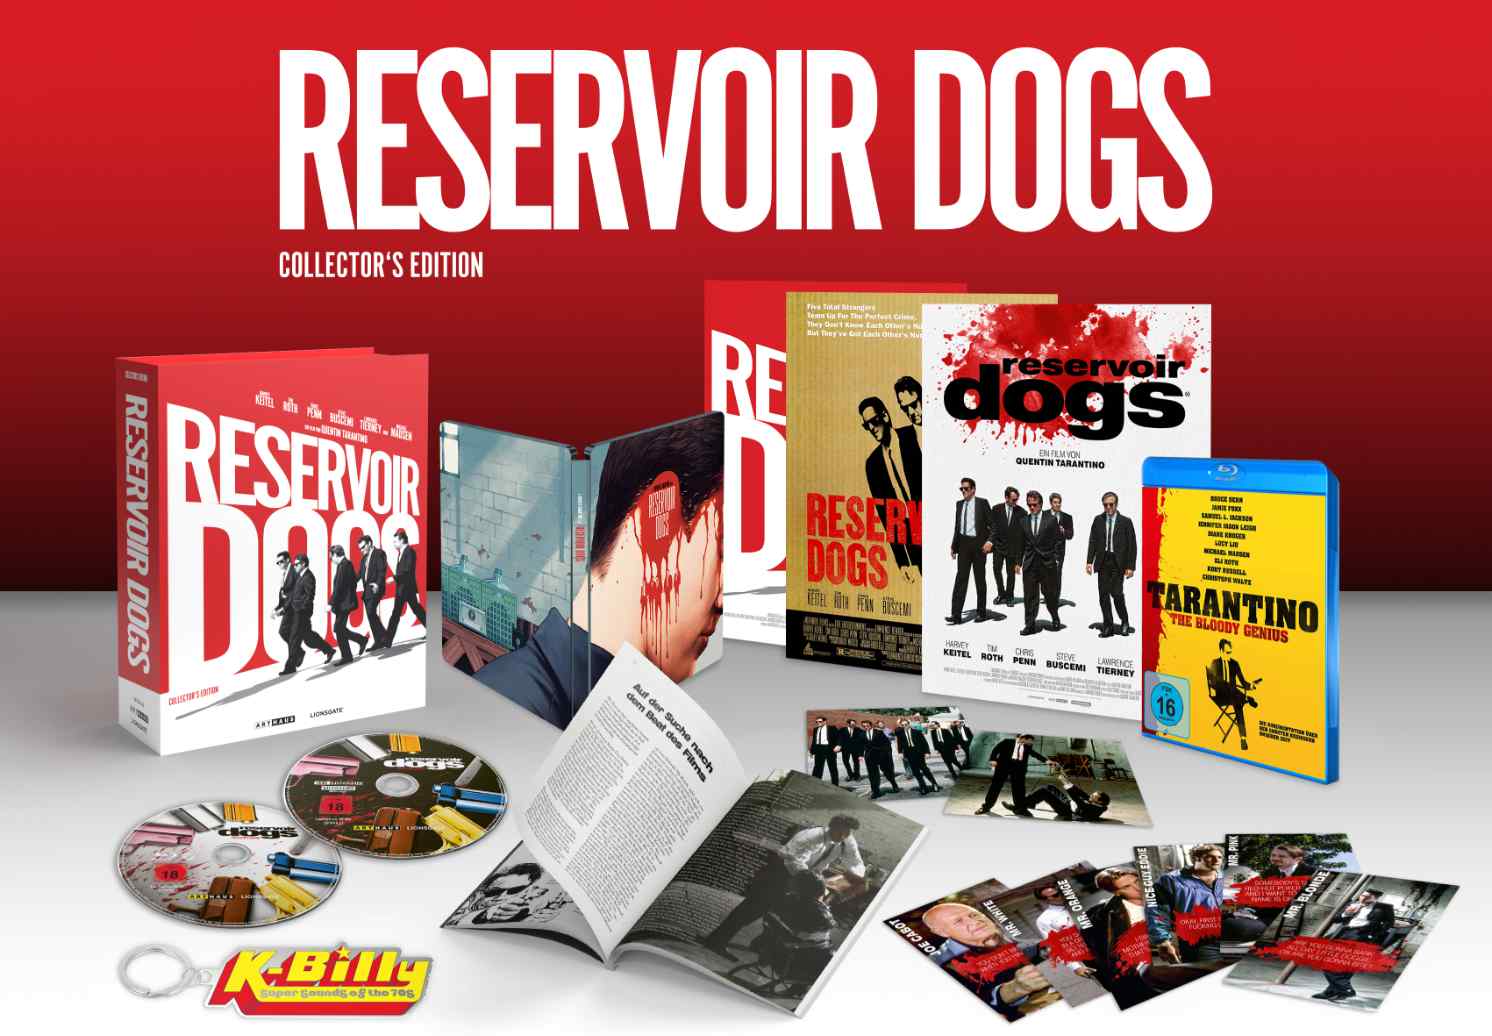 Reservoir Dog's Collector's Edition